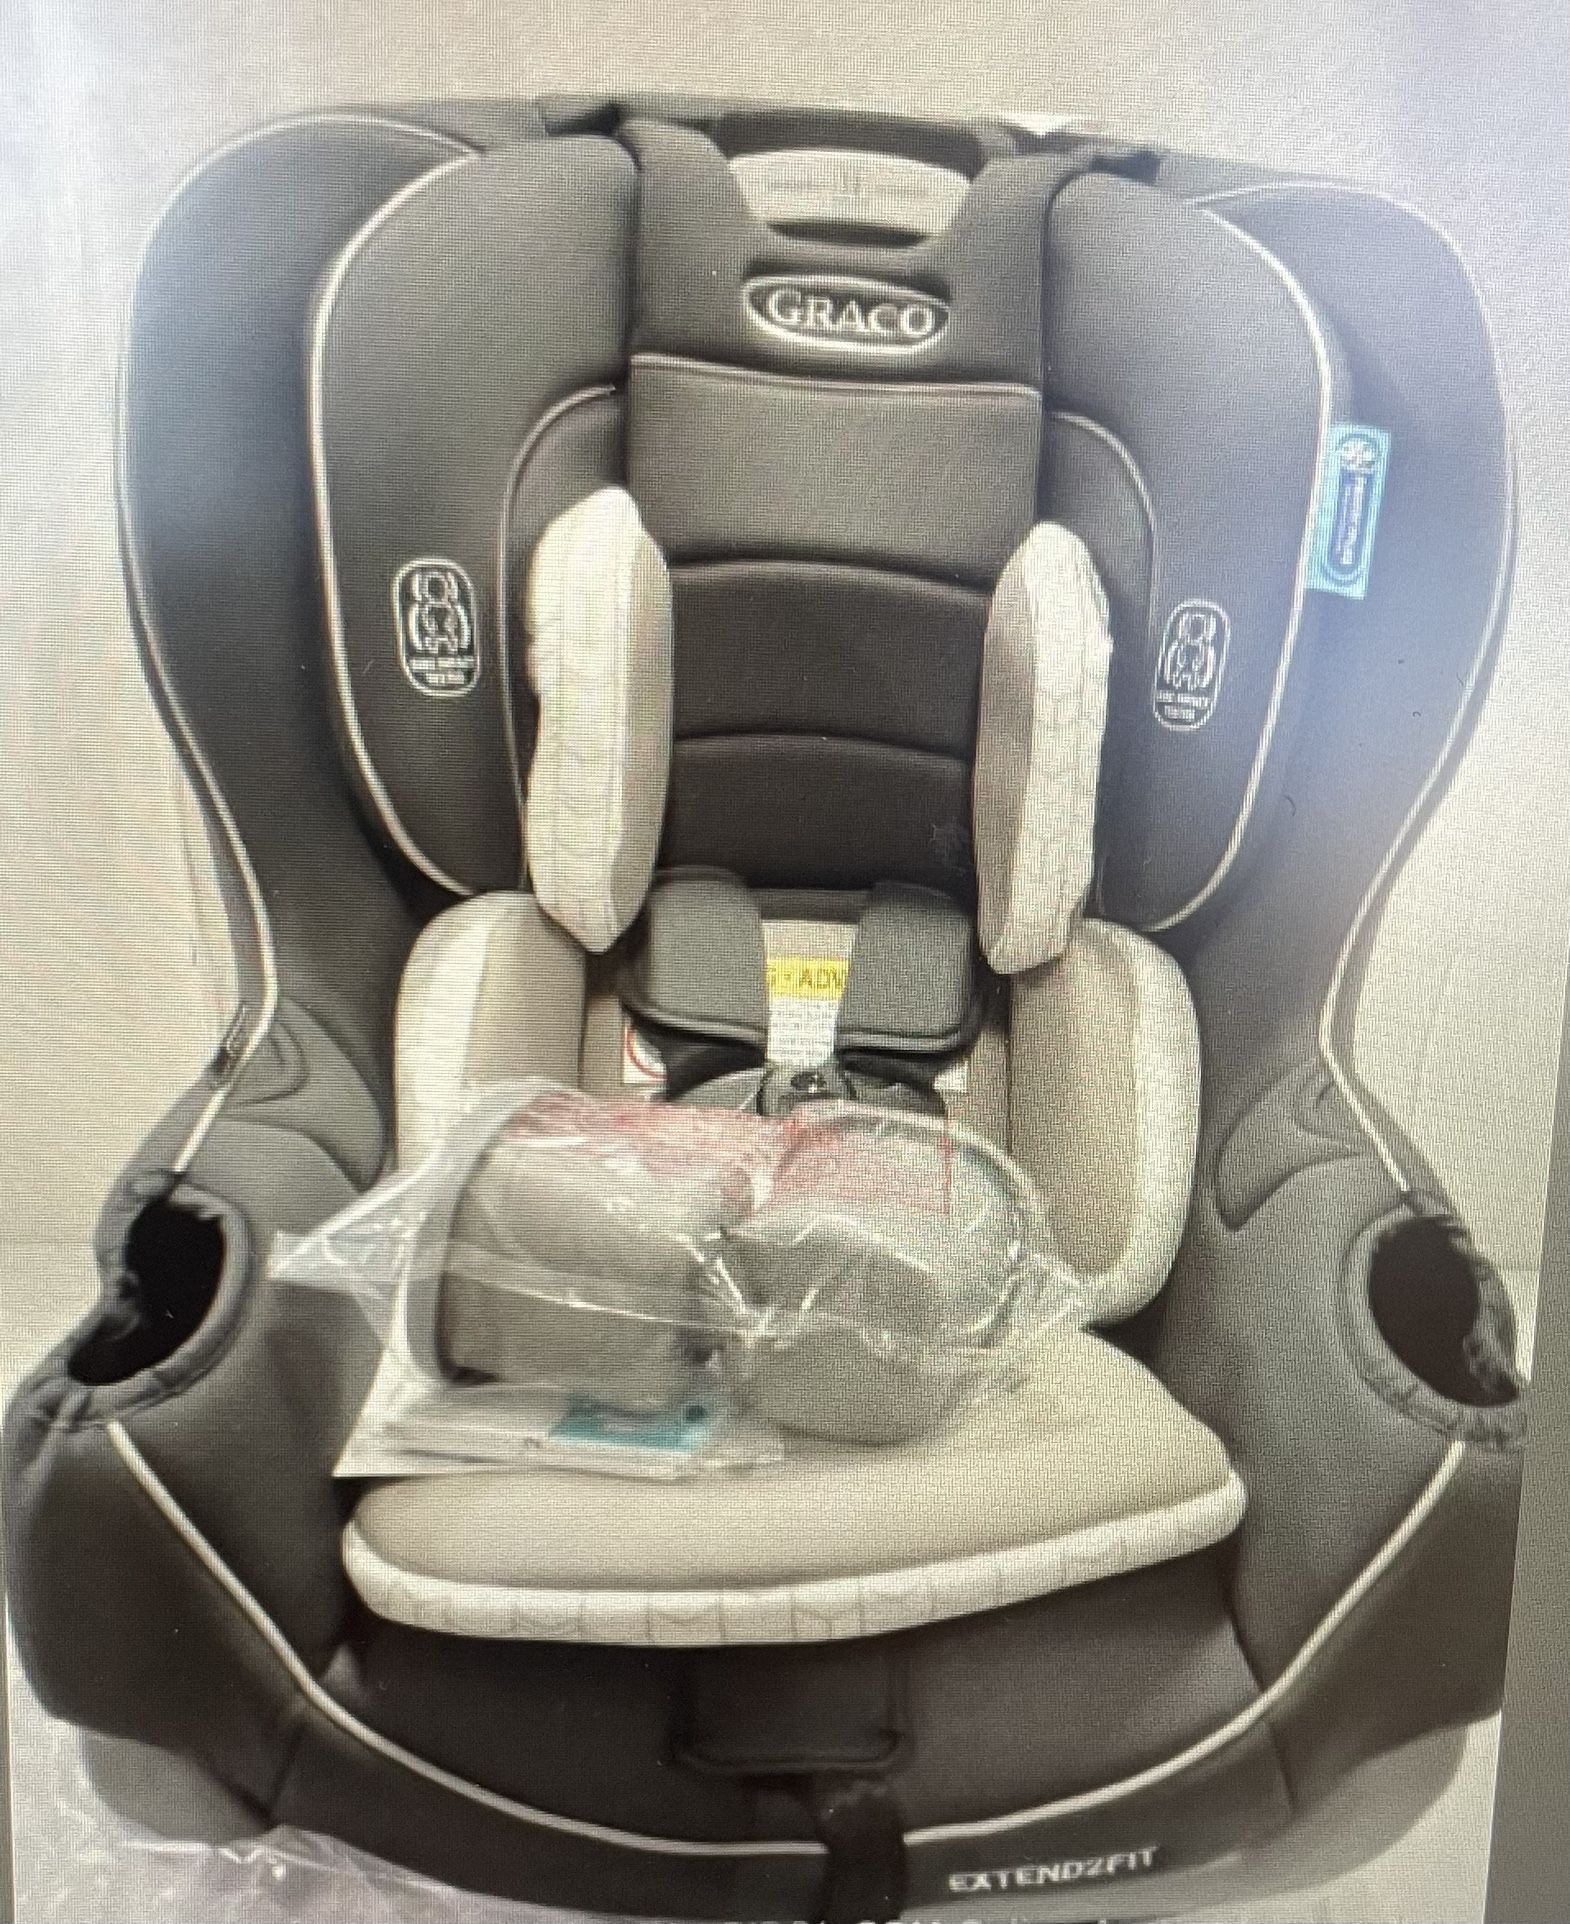 Graco Extend2Fit 2 in 1 car seat (retail $199)